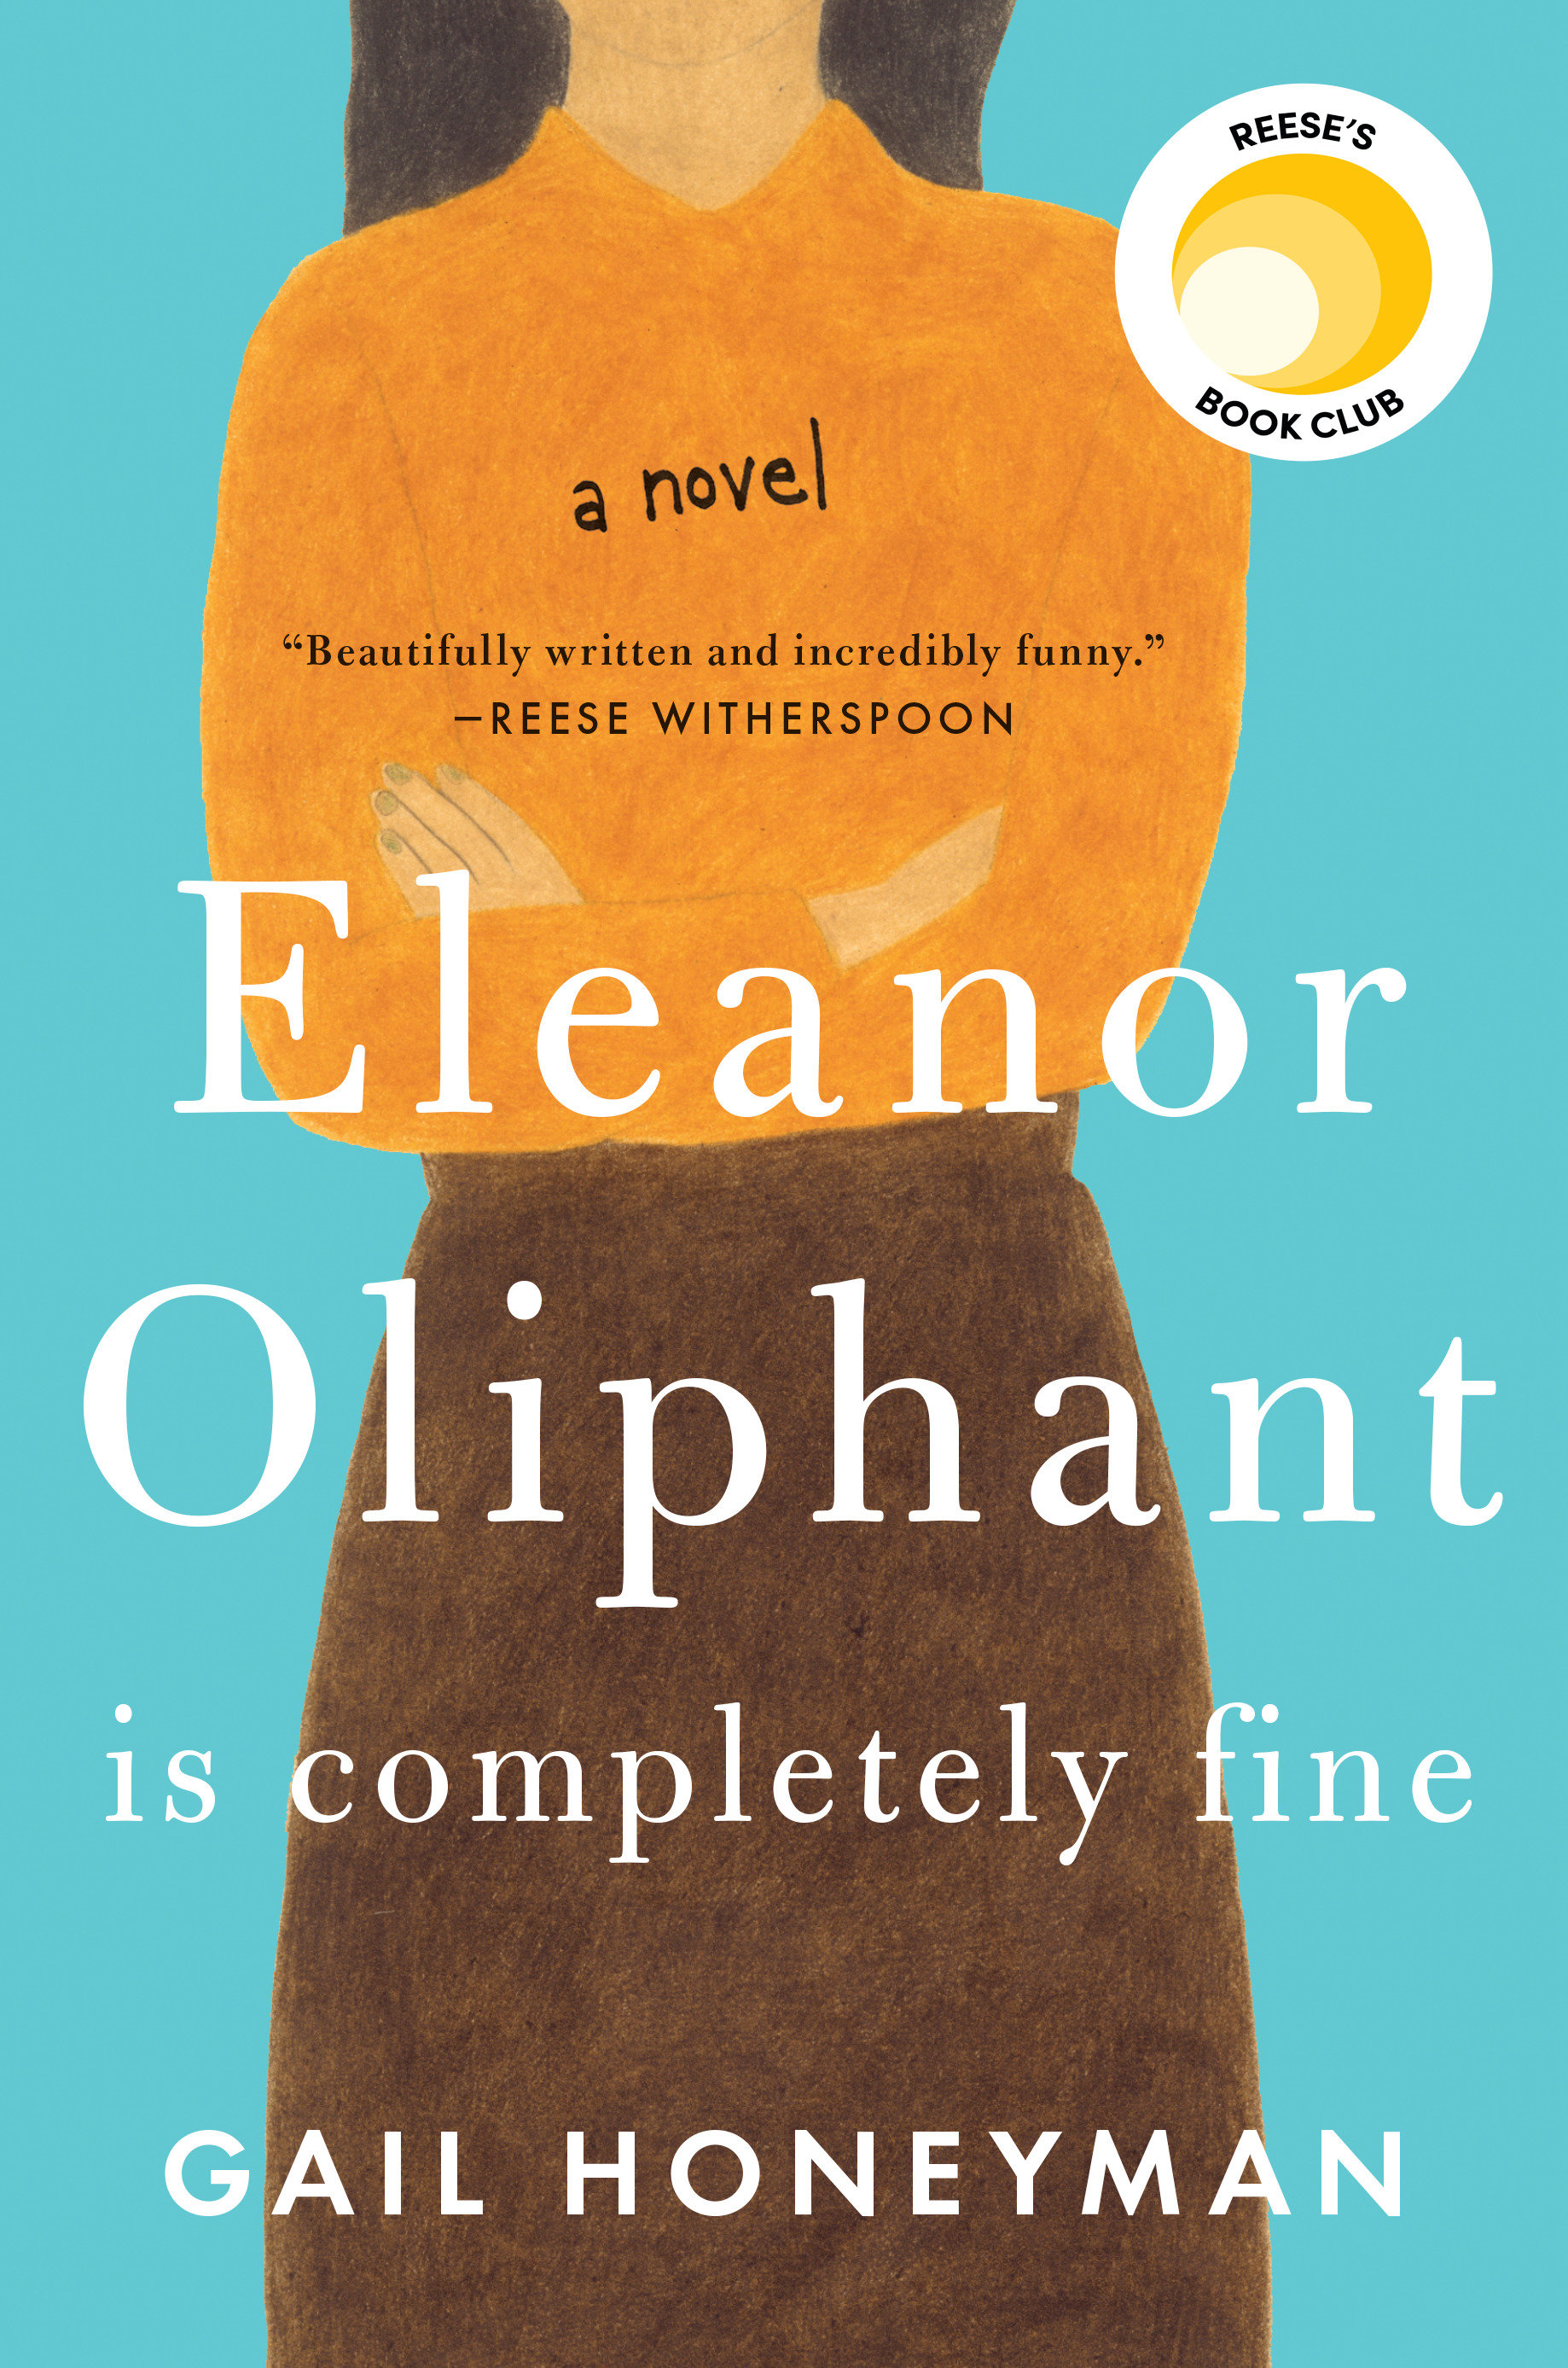 Eleanor Oliphant Is Completely Fine (Hardcover Book)